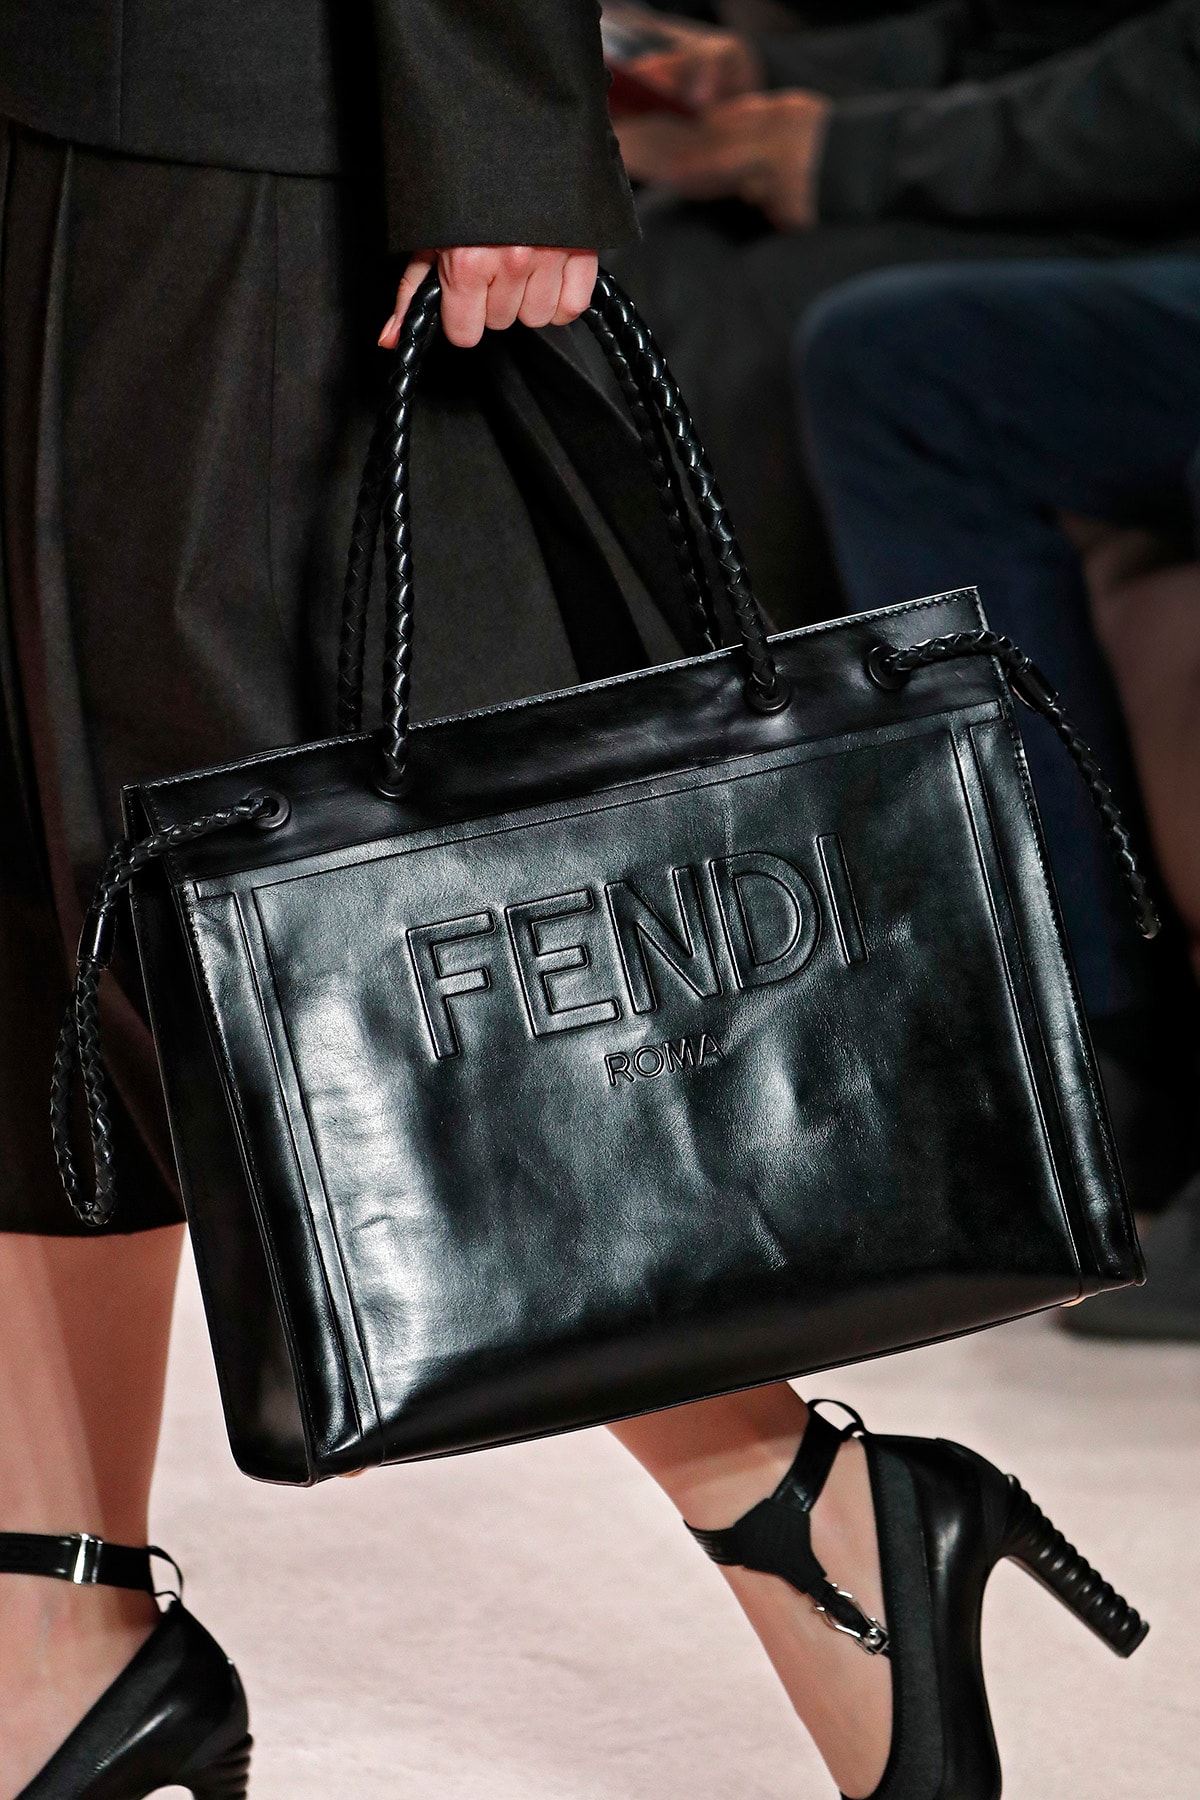 Fendi Fall/Winter 2020 Collection Bags Accessories Tote Leather Black